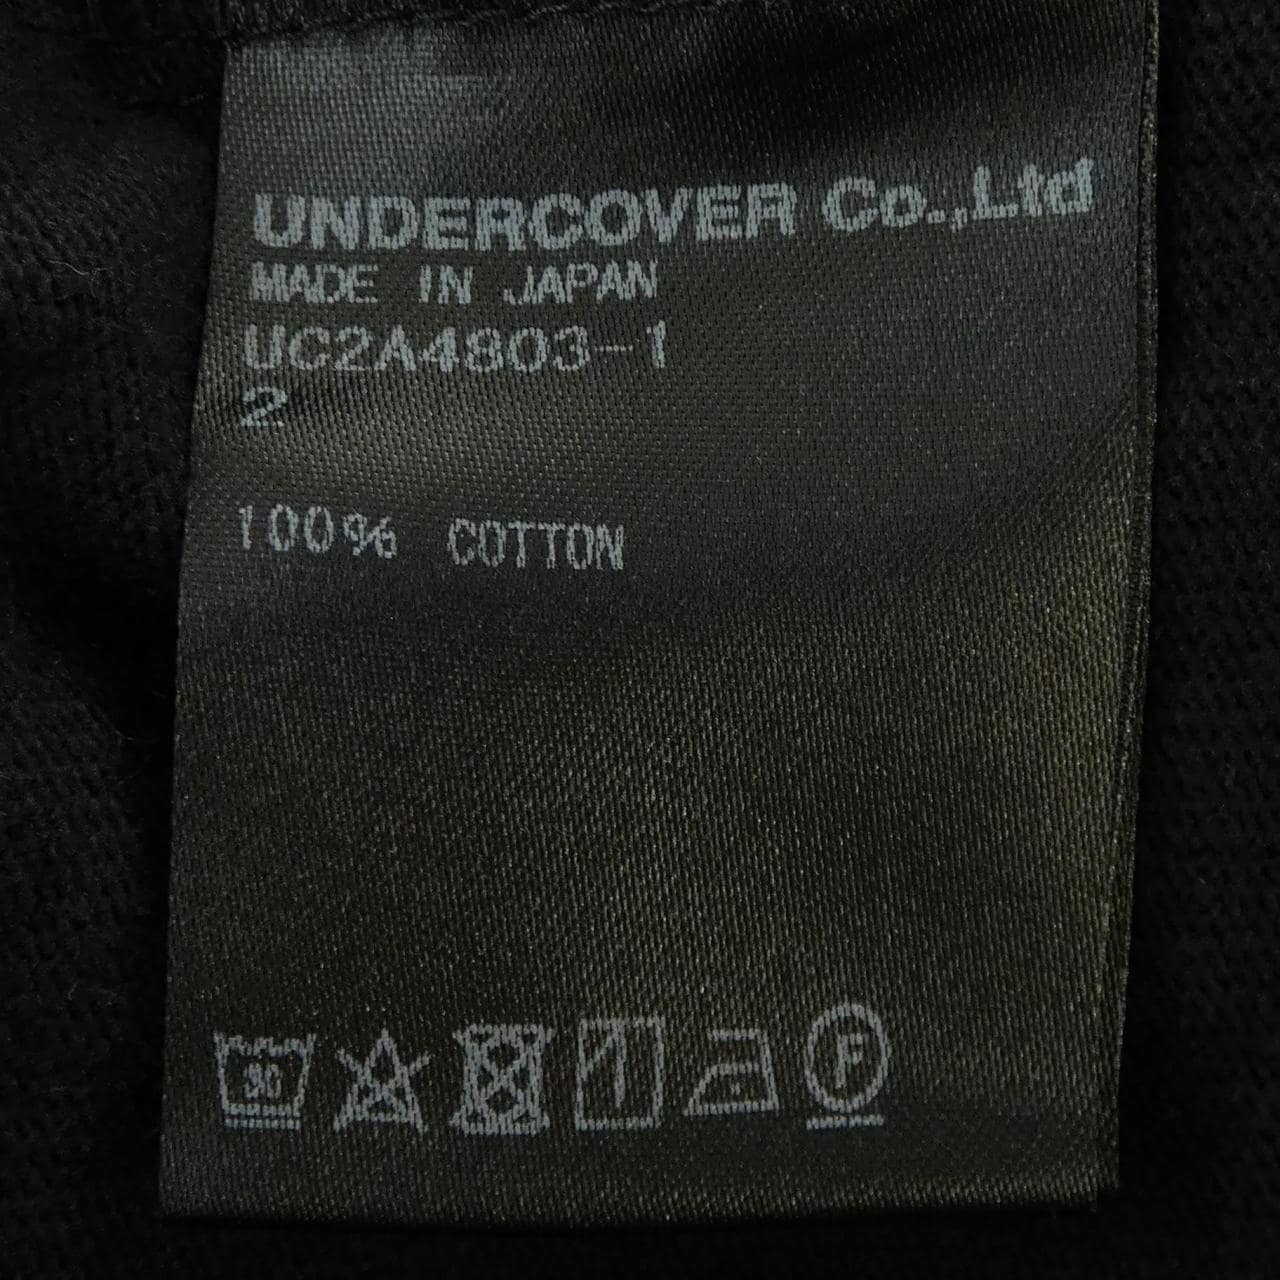 UNDER COVER T-shirt